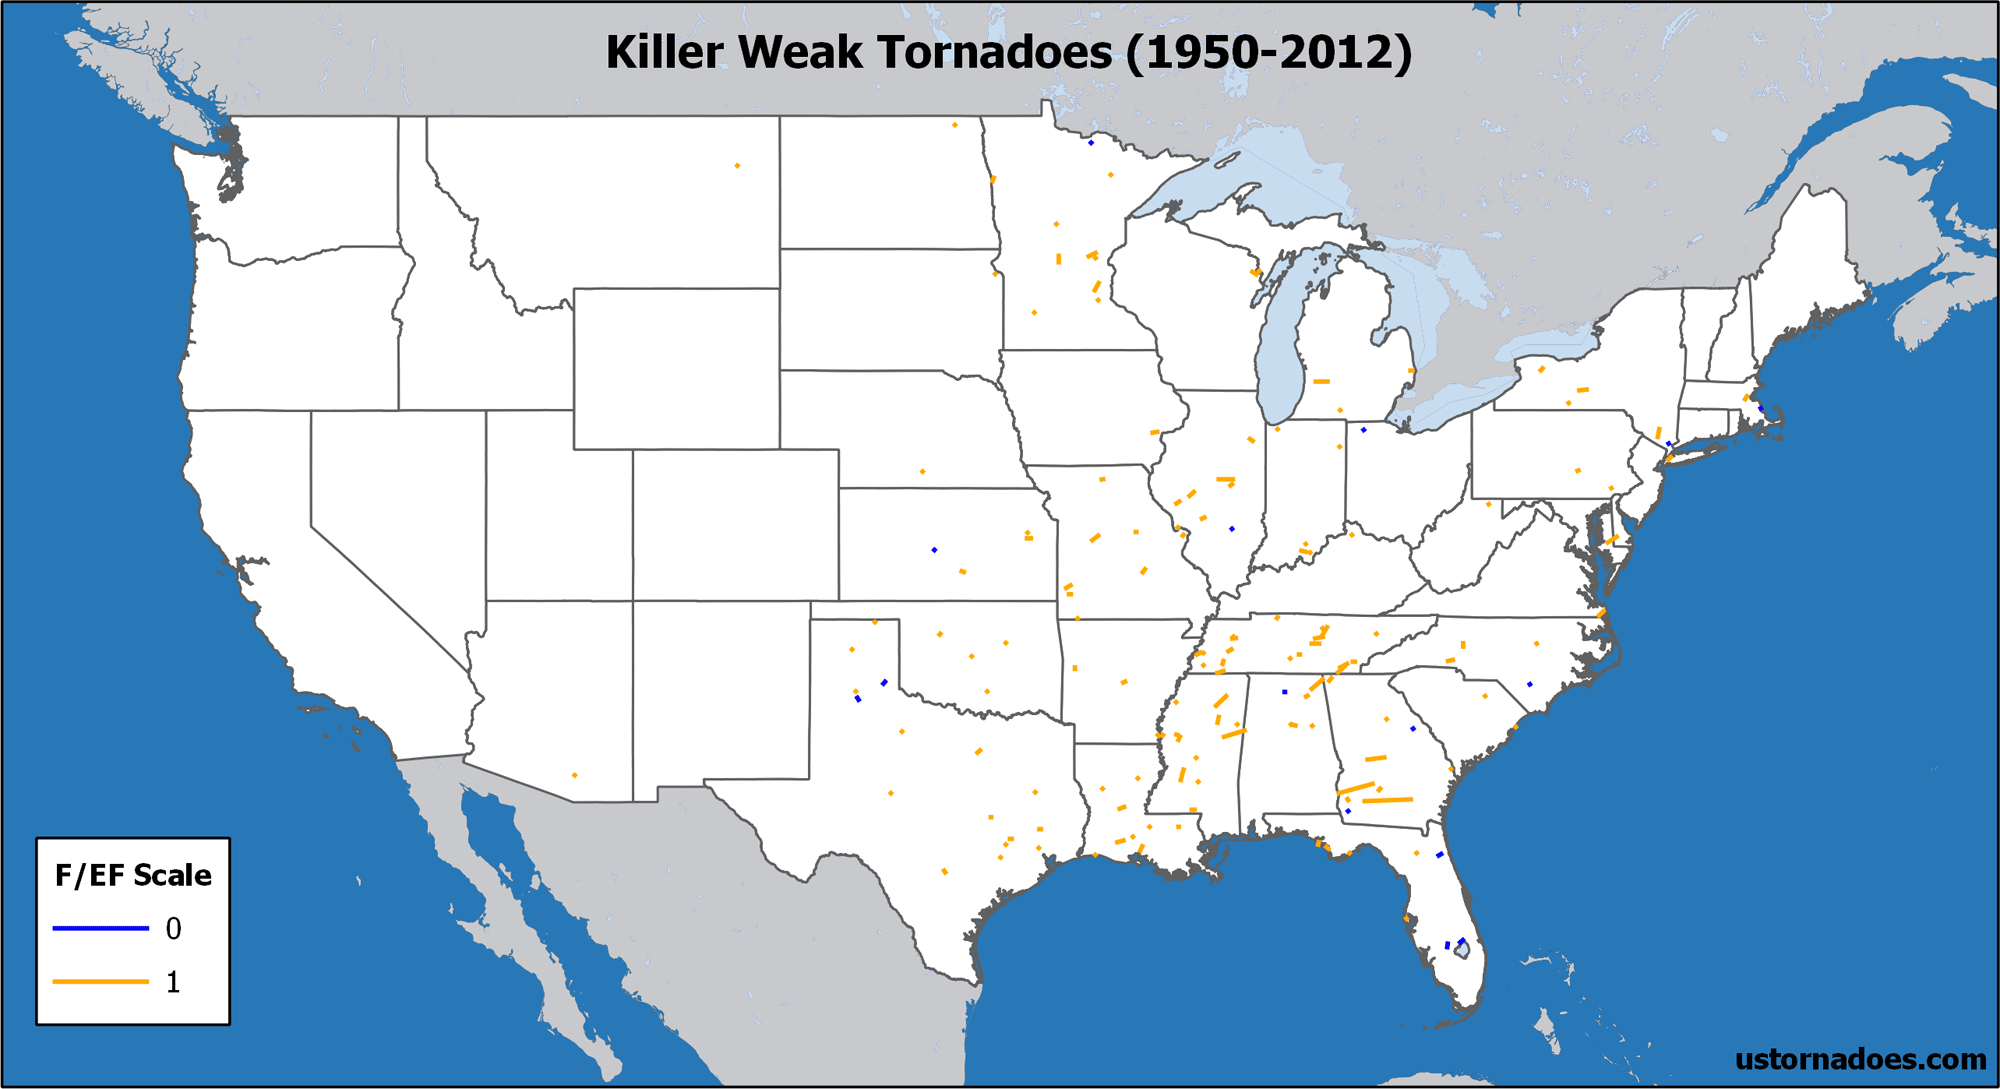 Weak tornadoes are deadly, too